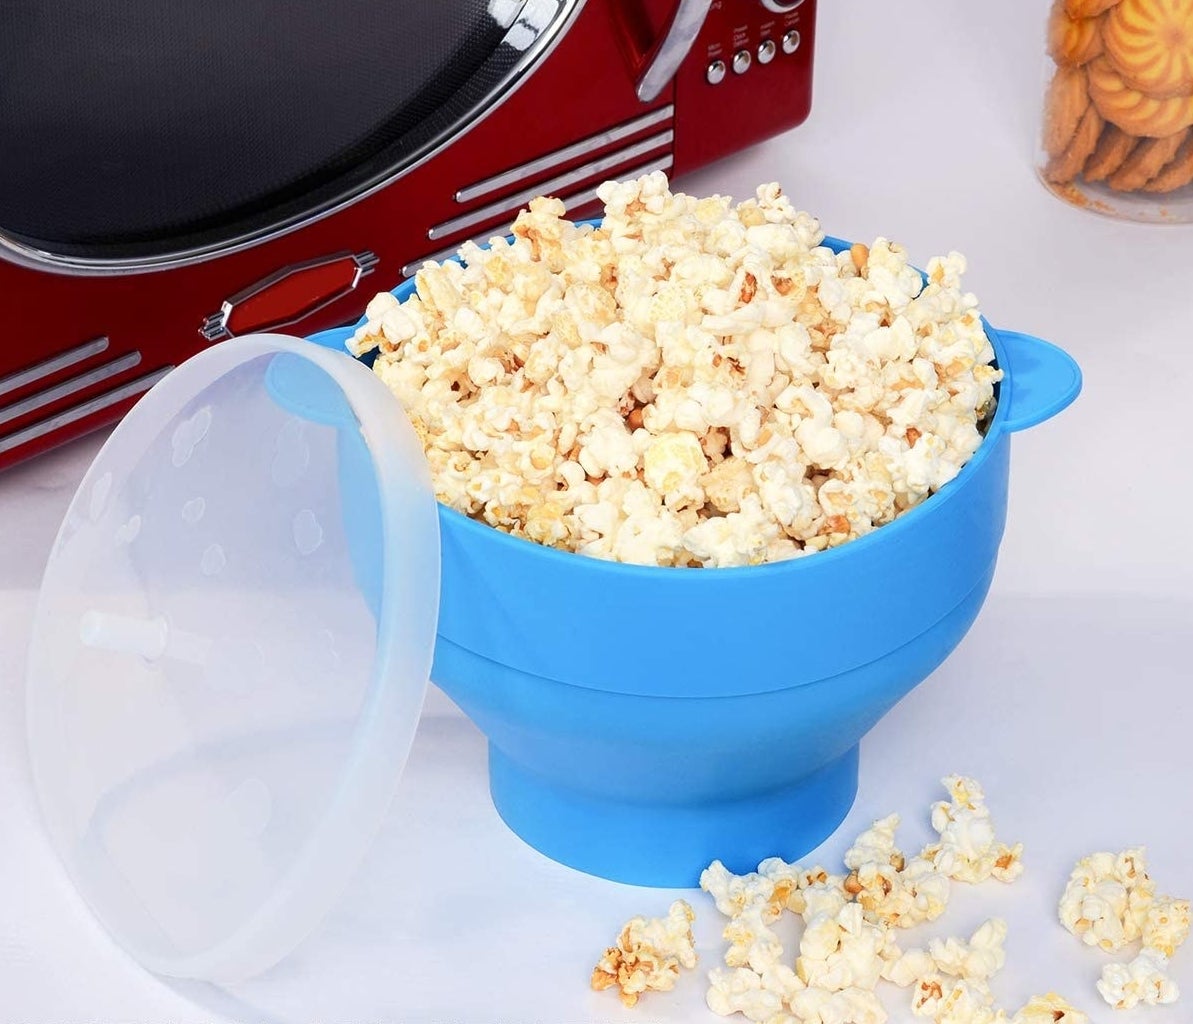 the bowl full of popcorn in front of a microwave